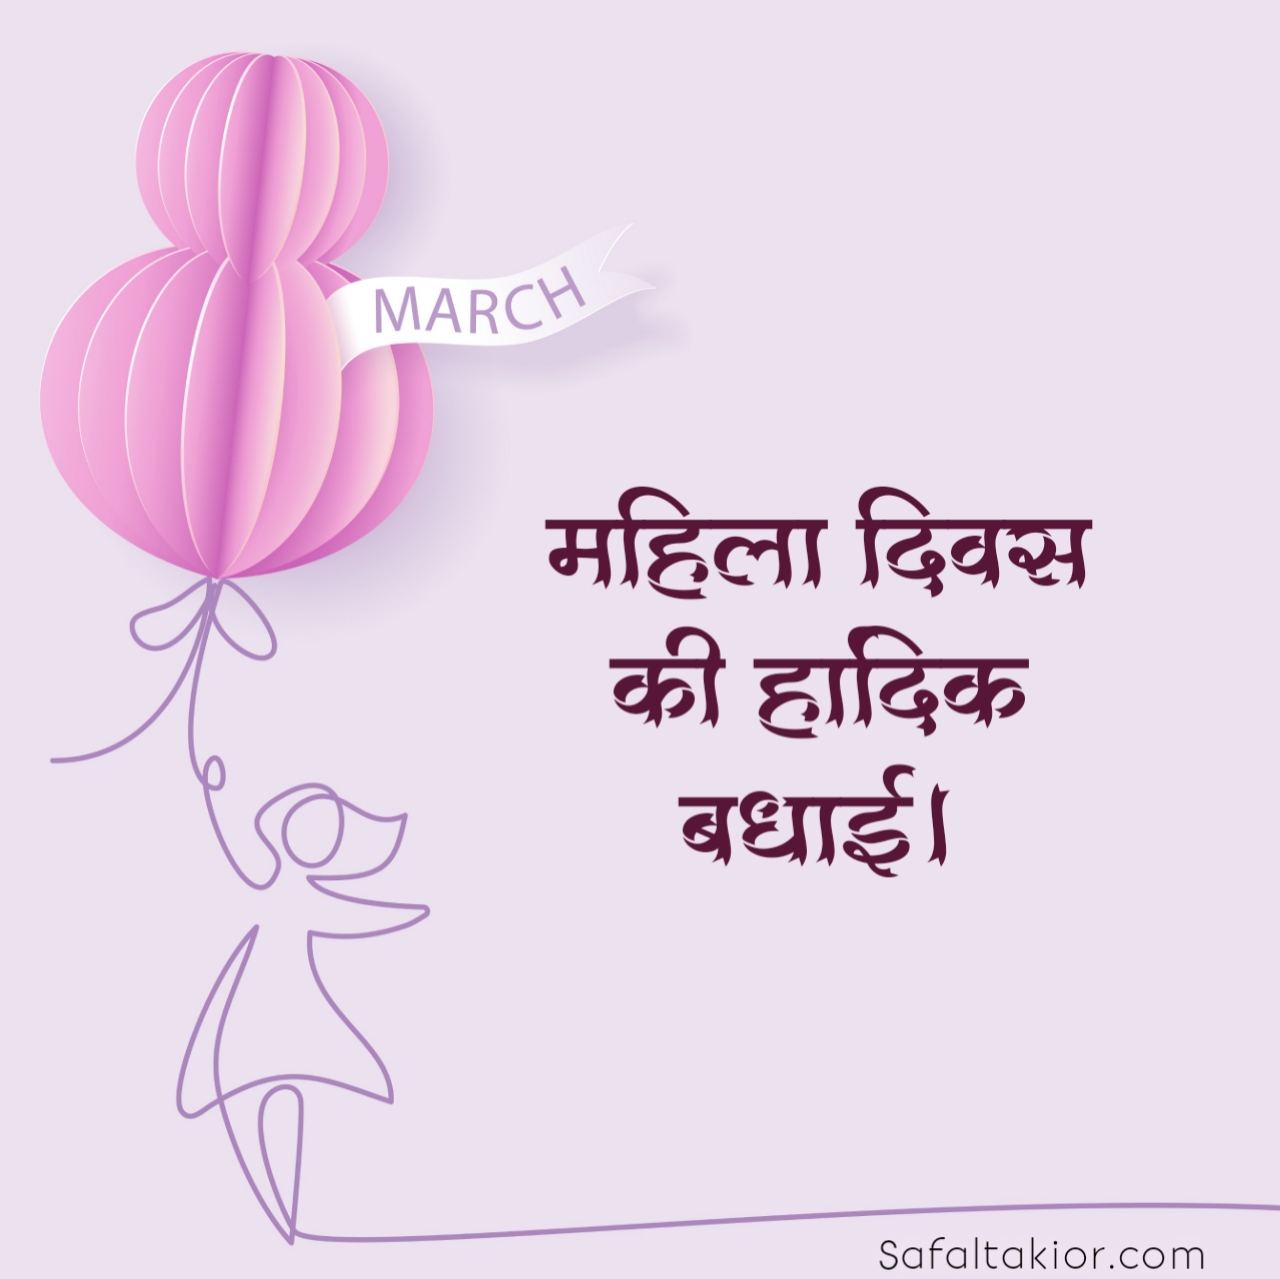  women's day wishes to colleagues hinid